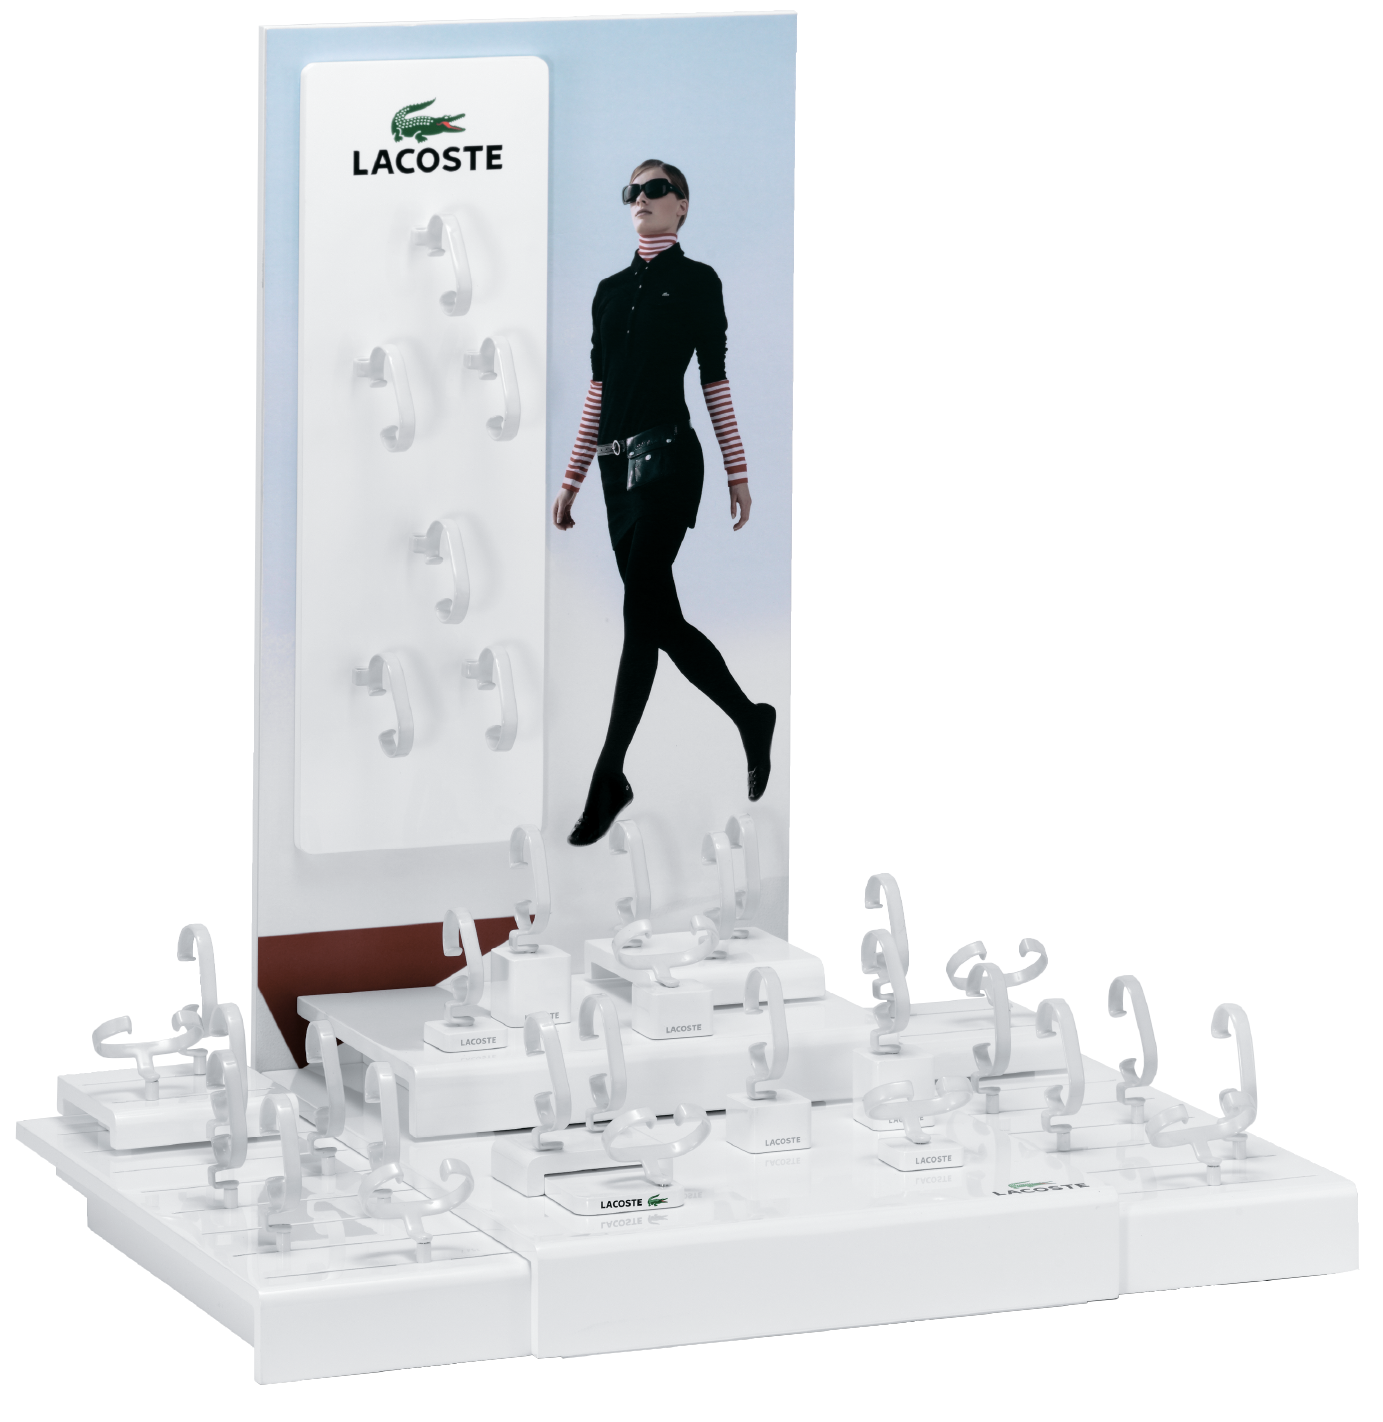 Lacoste-Boutique-Retail-POS material-watch display-watch stand-counter-window-backwall